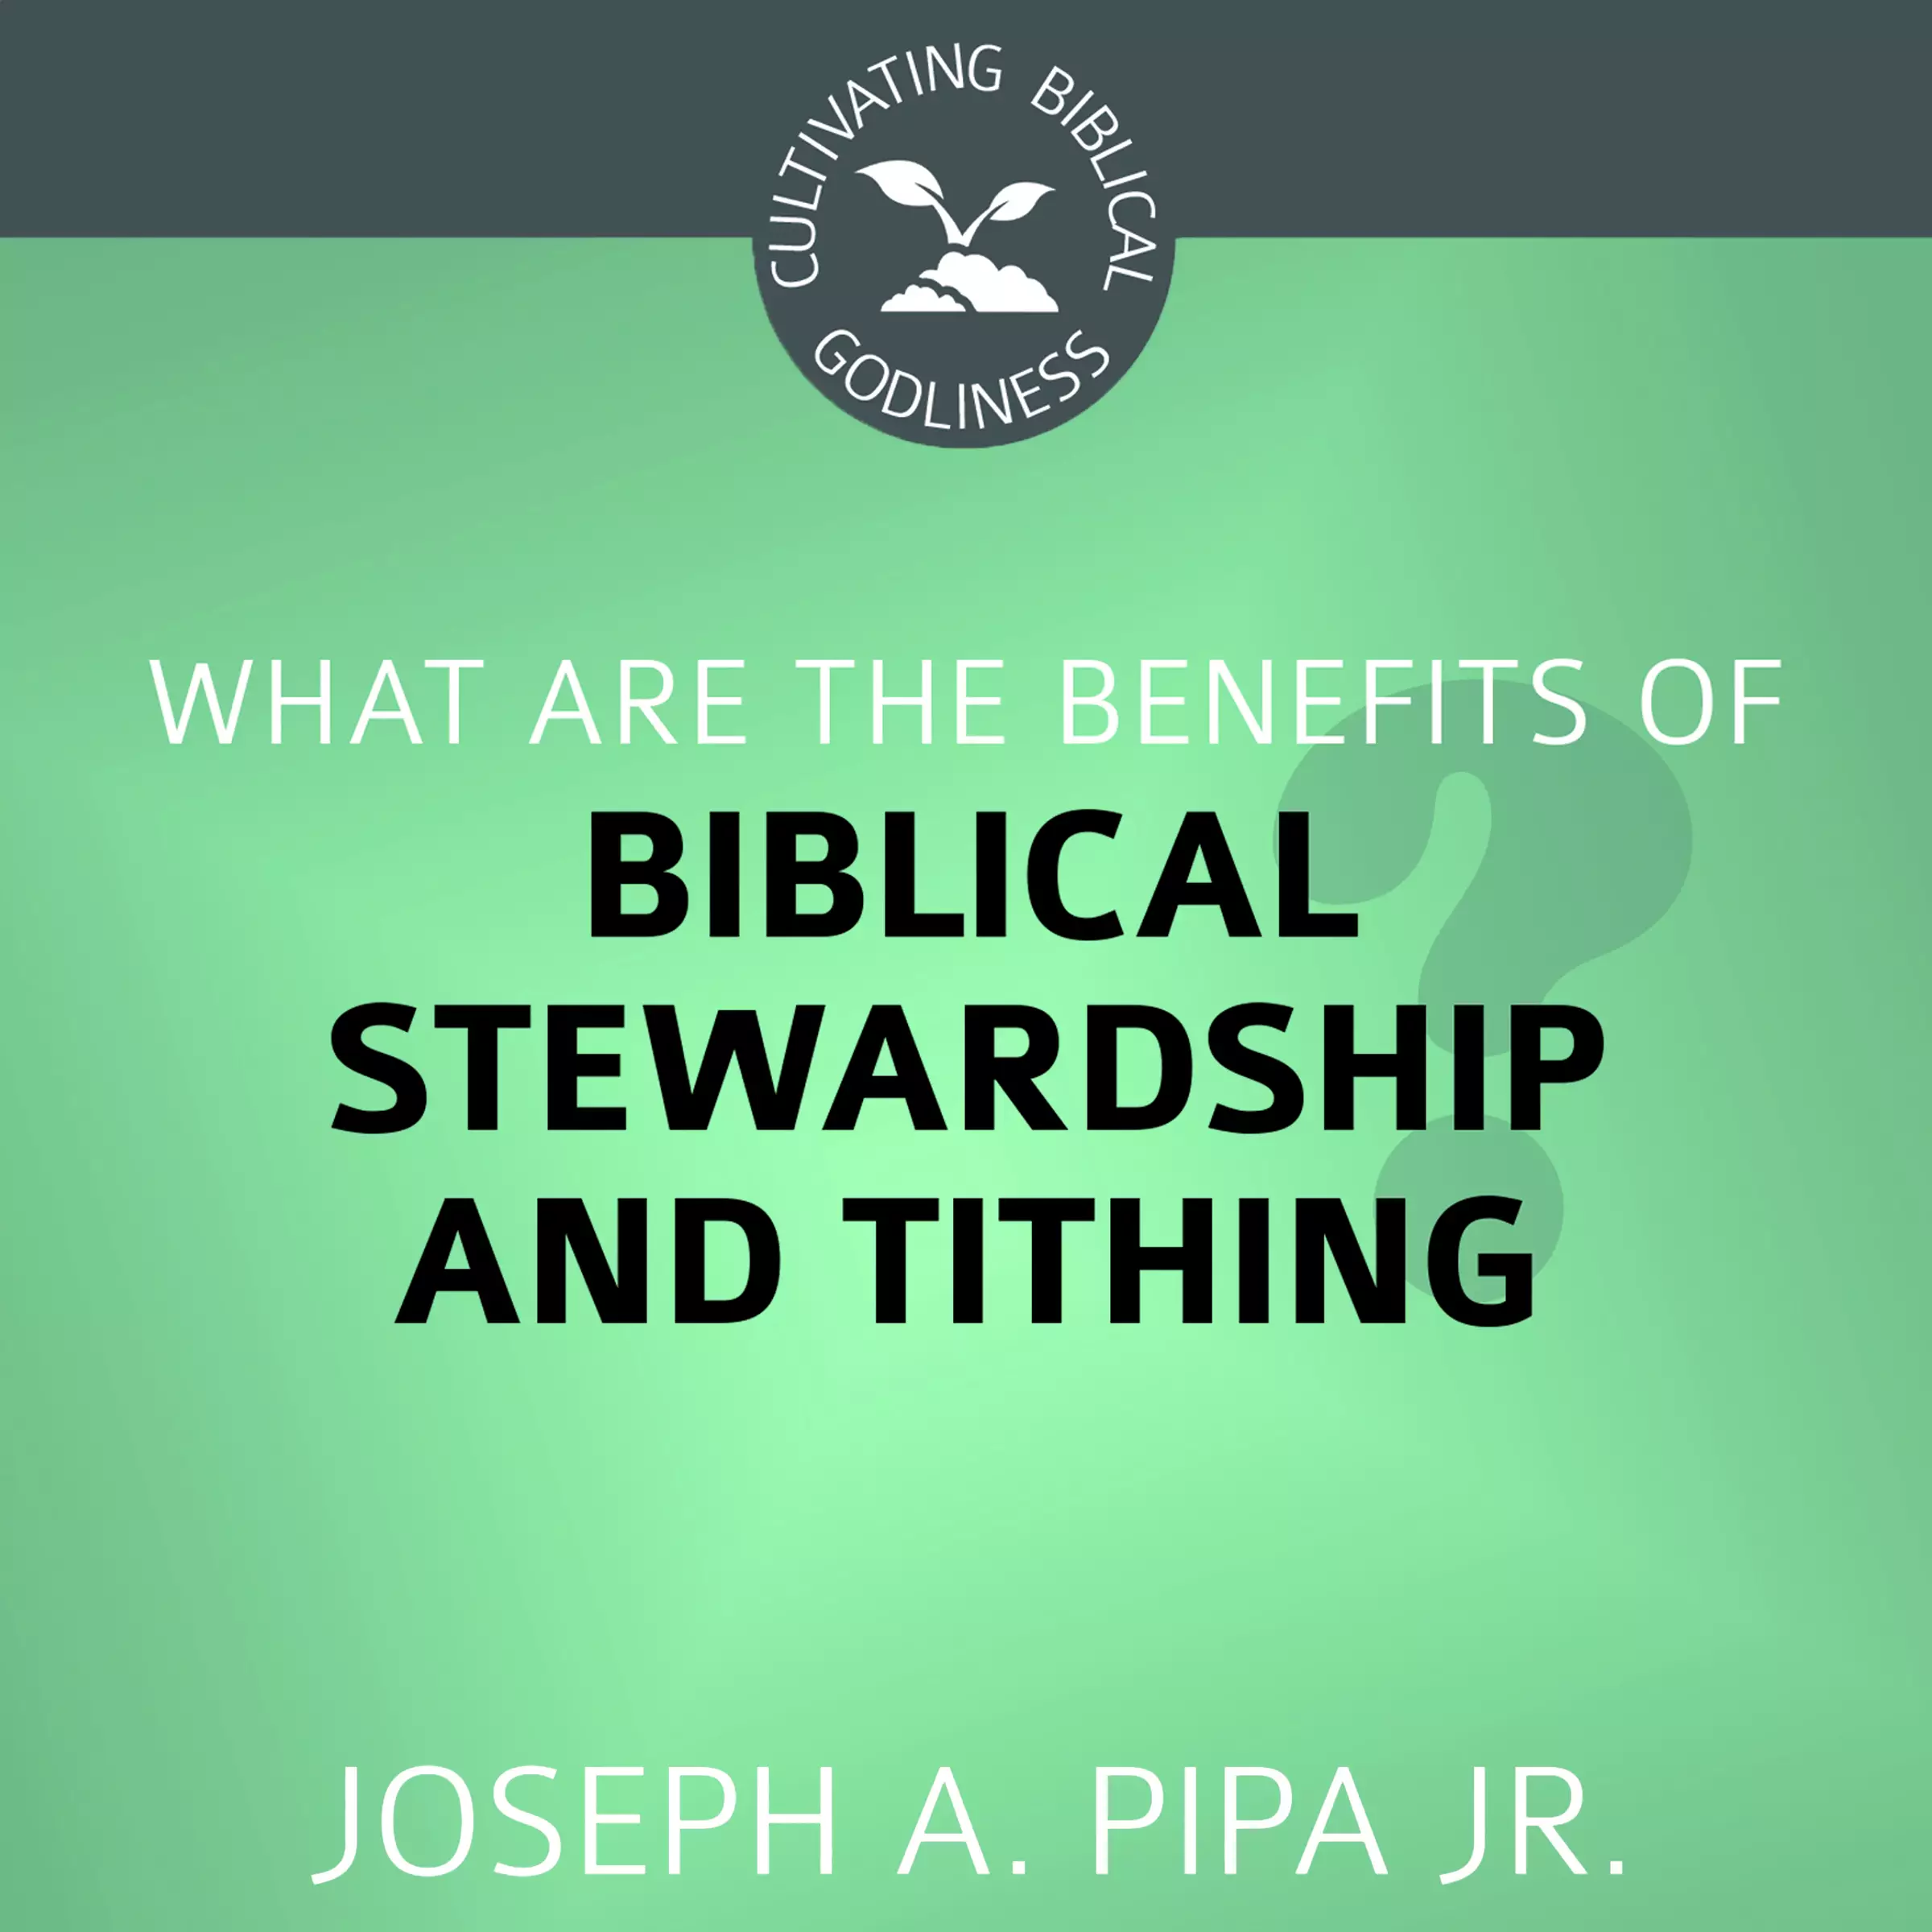 What Are the Benefits of Biblical Stewardship and Tithing?